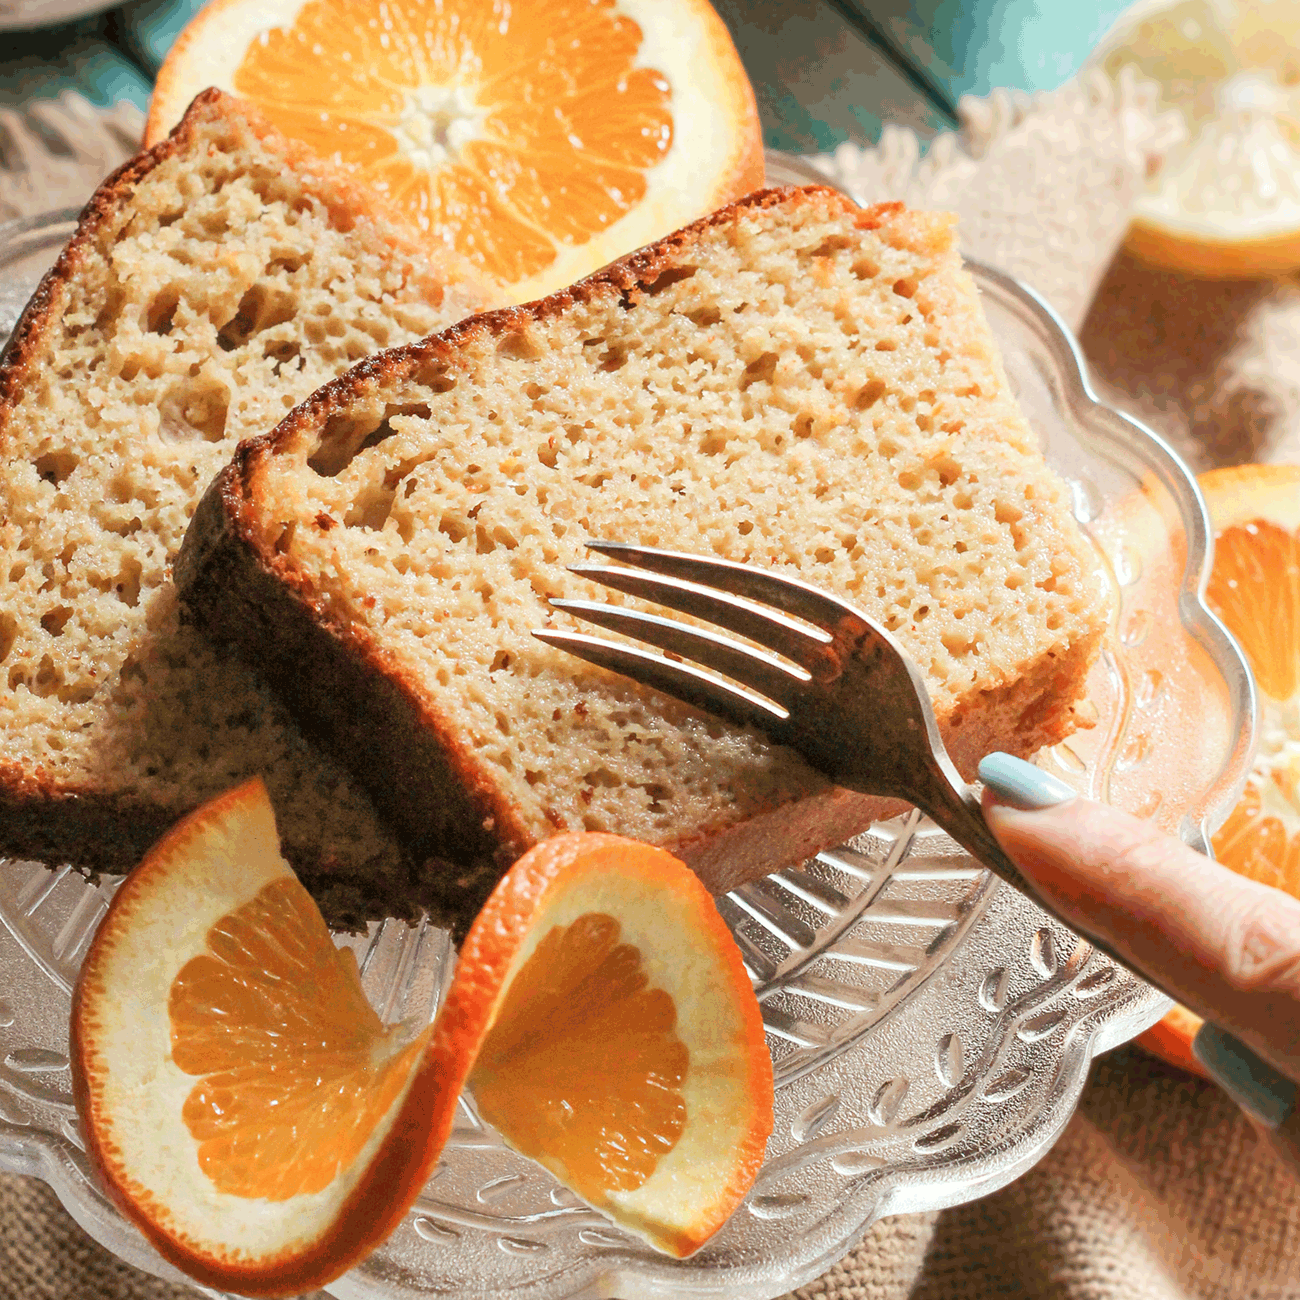 This Healthy BOOZY Orange Pound Cake is sweet, buttery, and full of refreshing orange flavor. You'd never know it's low sugar, high protein, and whole grain, and you’d DEFINITELY never guess that it’s made without butter! Healthy Dessert Recipes with sugar free, low calorie, low fat, low carb, high protein, gluten free, dairy free, vegan, and raw options at the Desserts With Benefits Blog (www.DessertsWithBenefits.com)